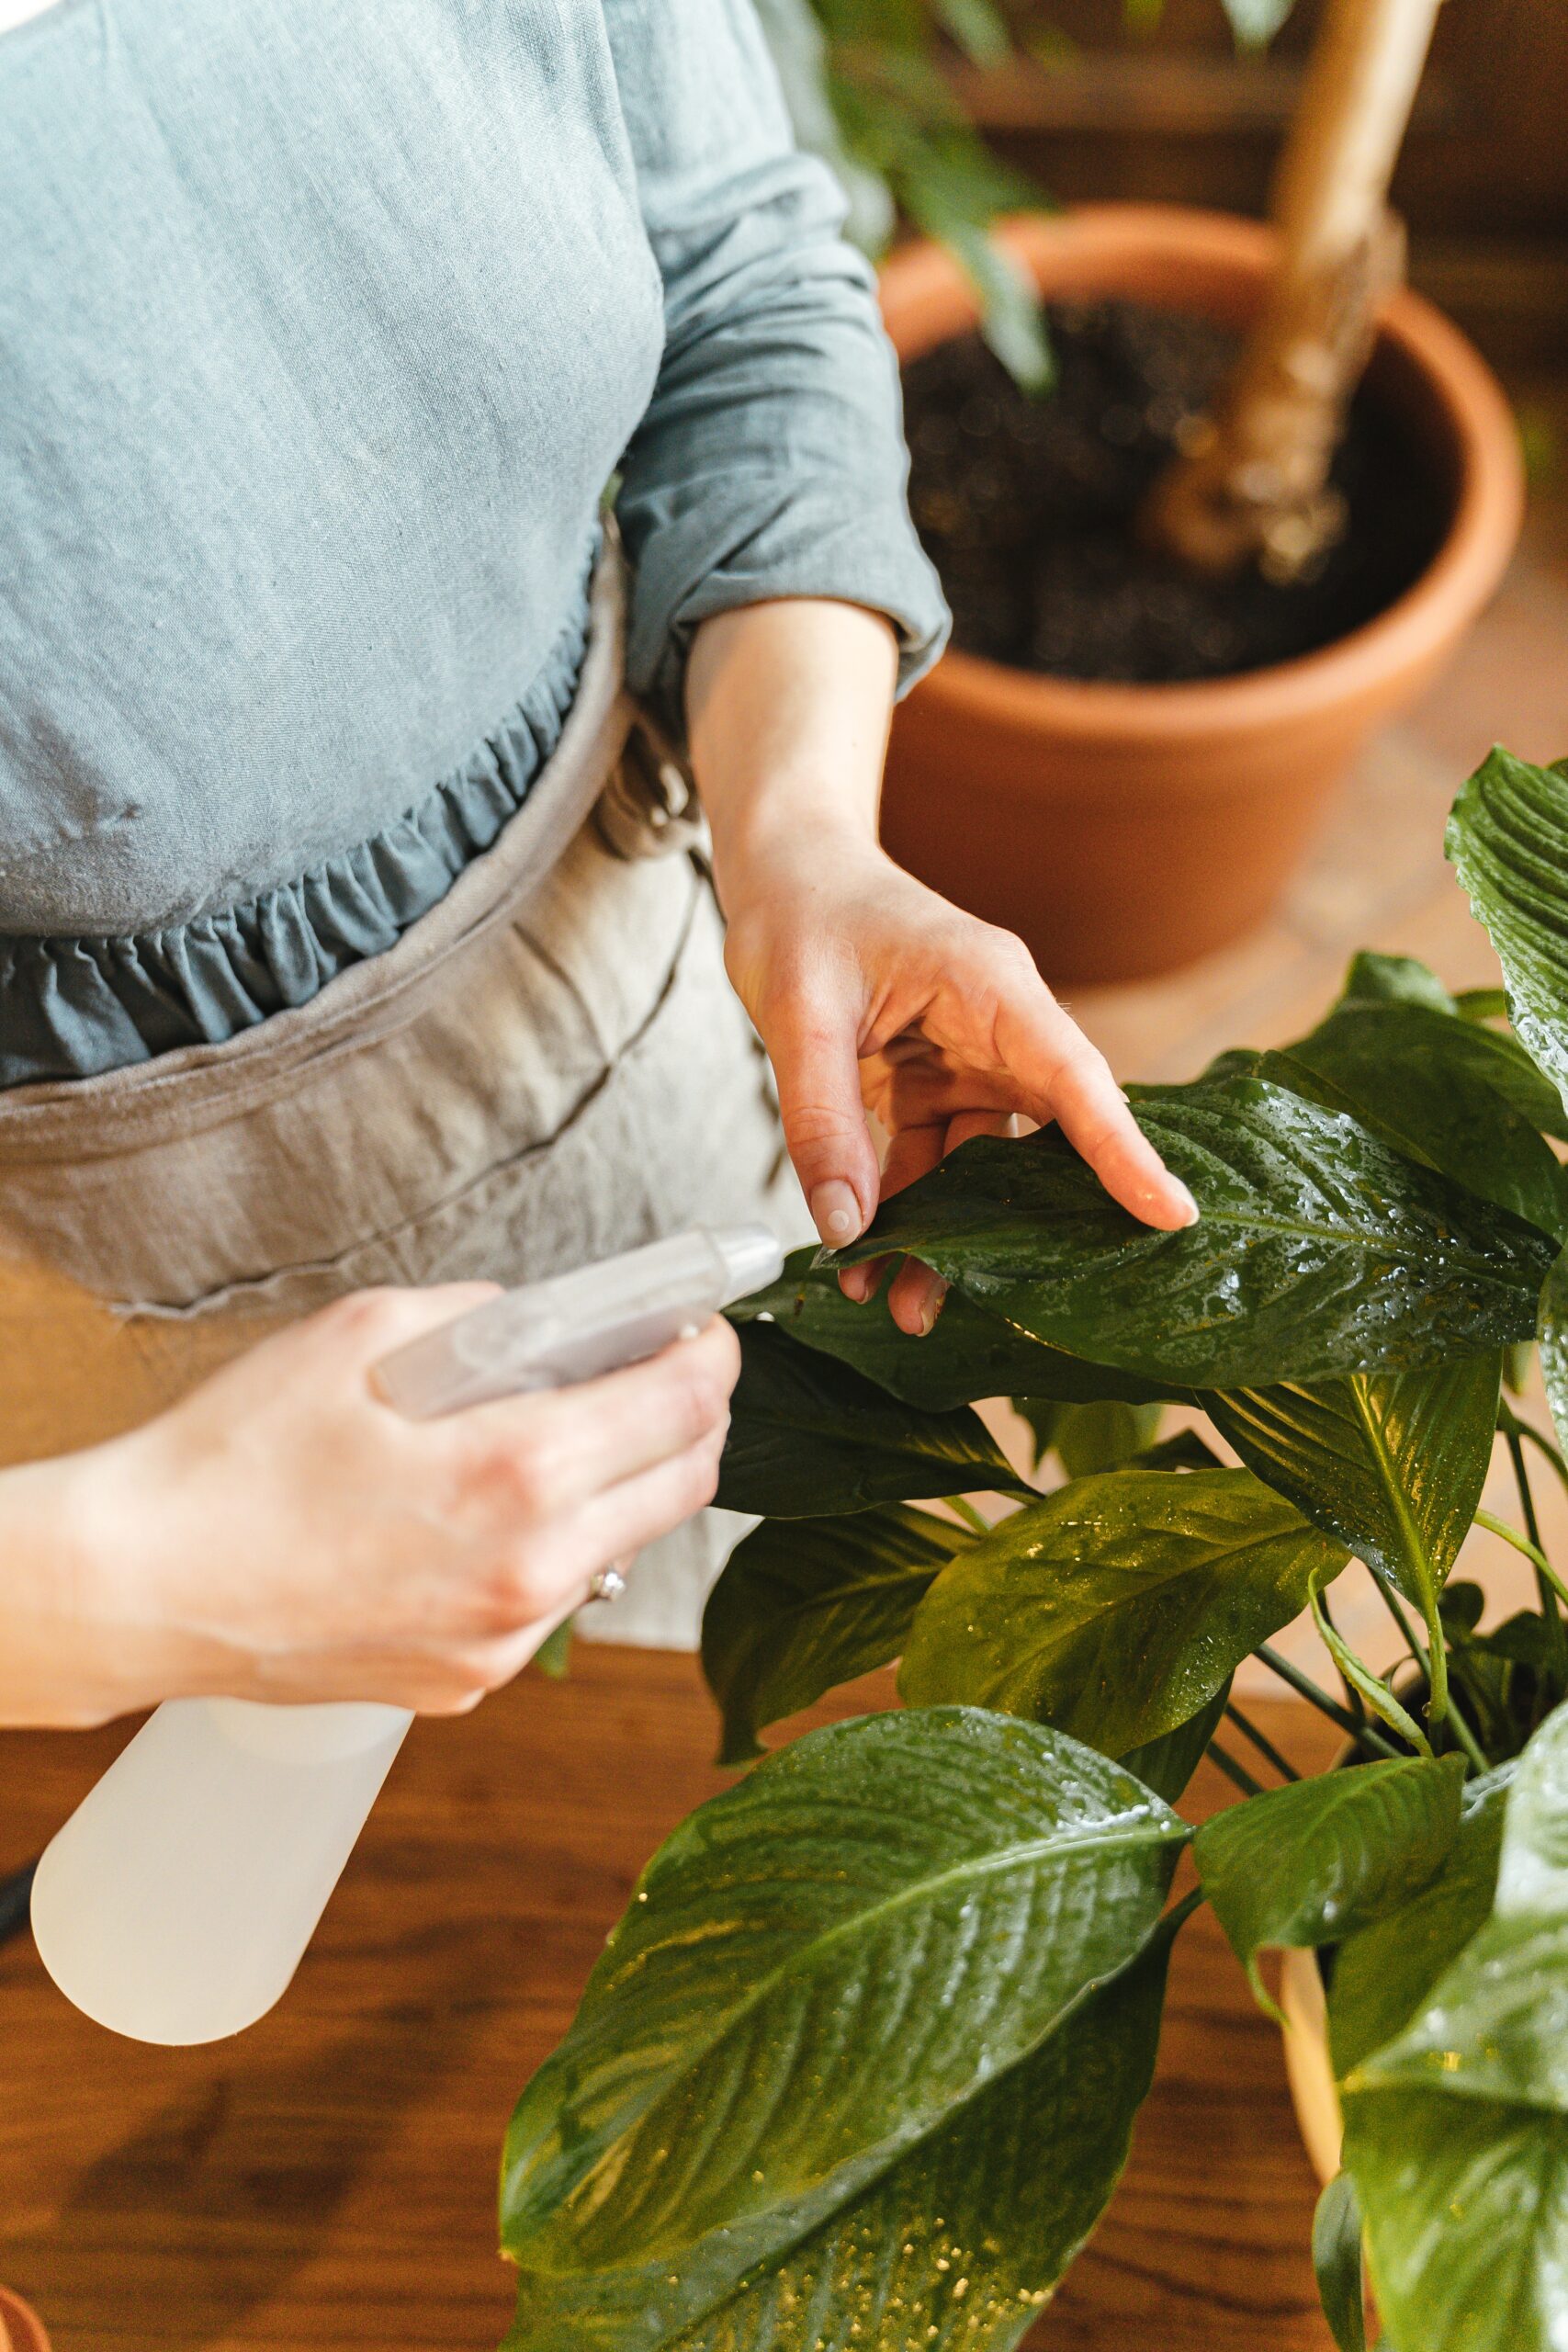 Caring for plants throughout changing seasons takes patience and intentional effort. Learn the tips it takes to manage your indoor plants throughout the seasons.